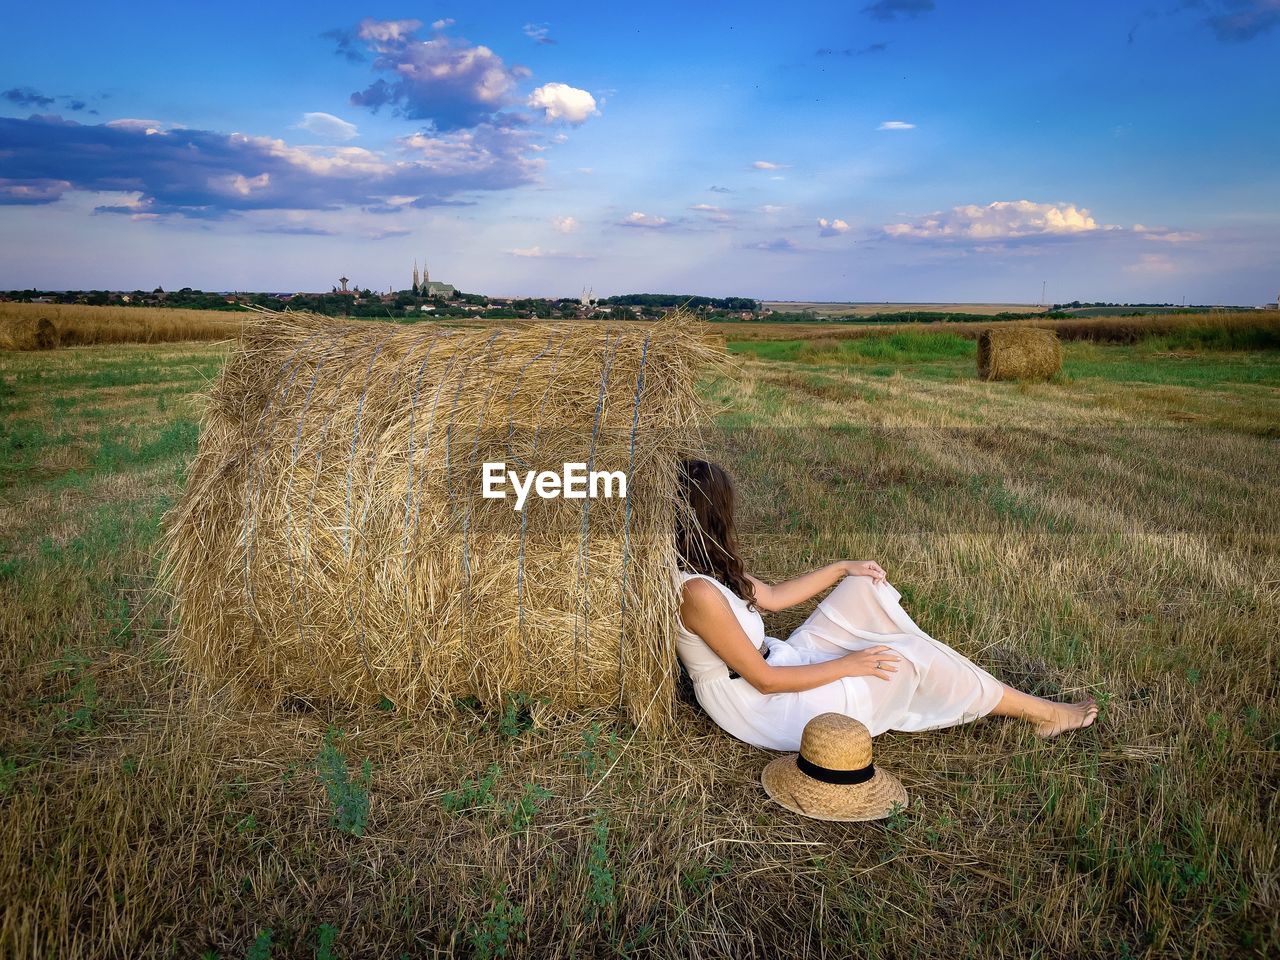 Rural scene of woman sitting down on the ground and leaning against a haystack on the field